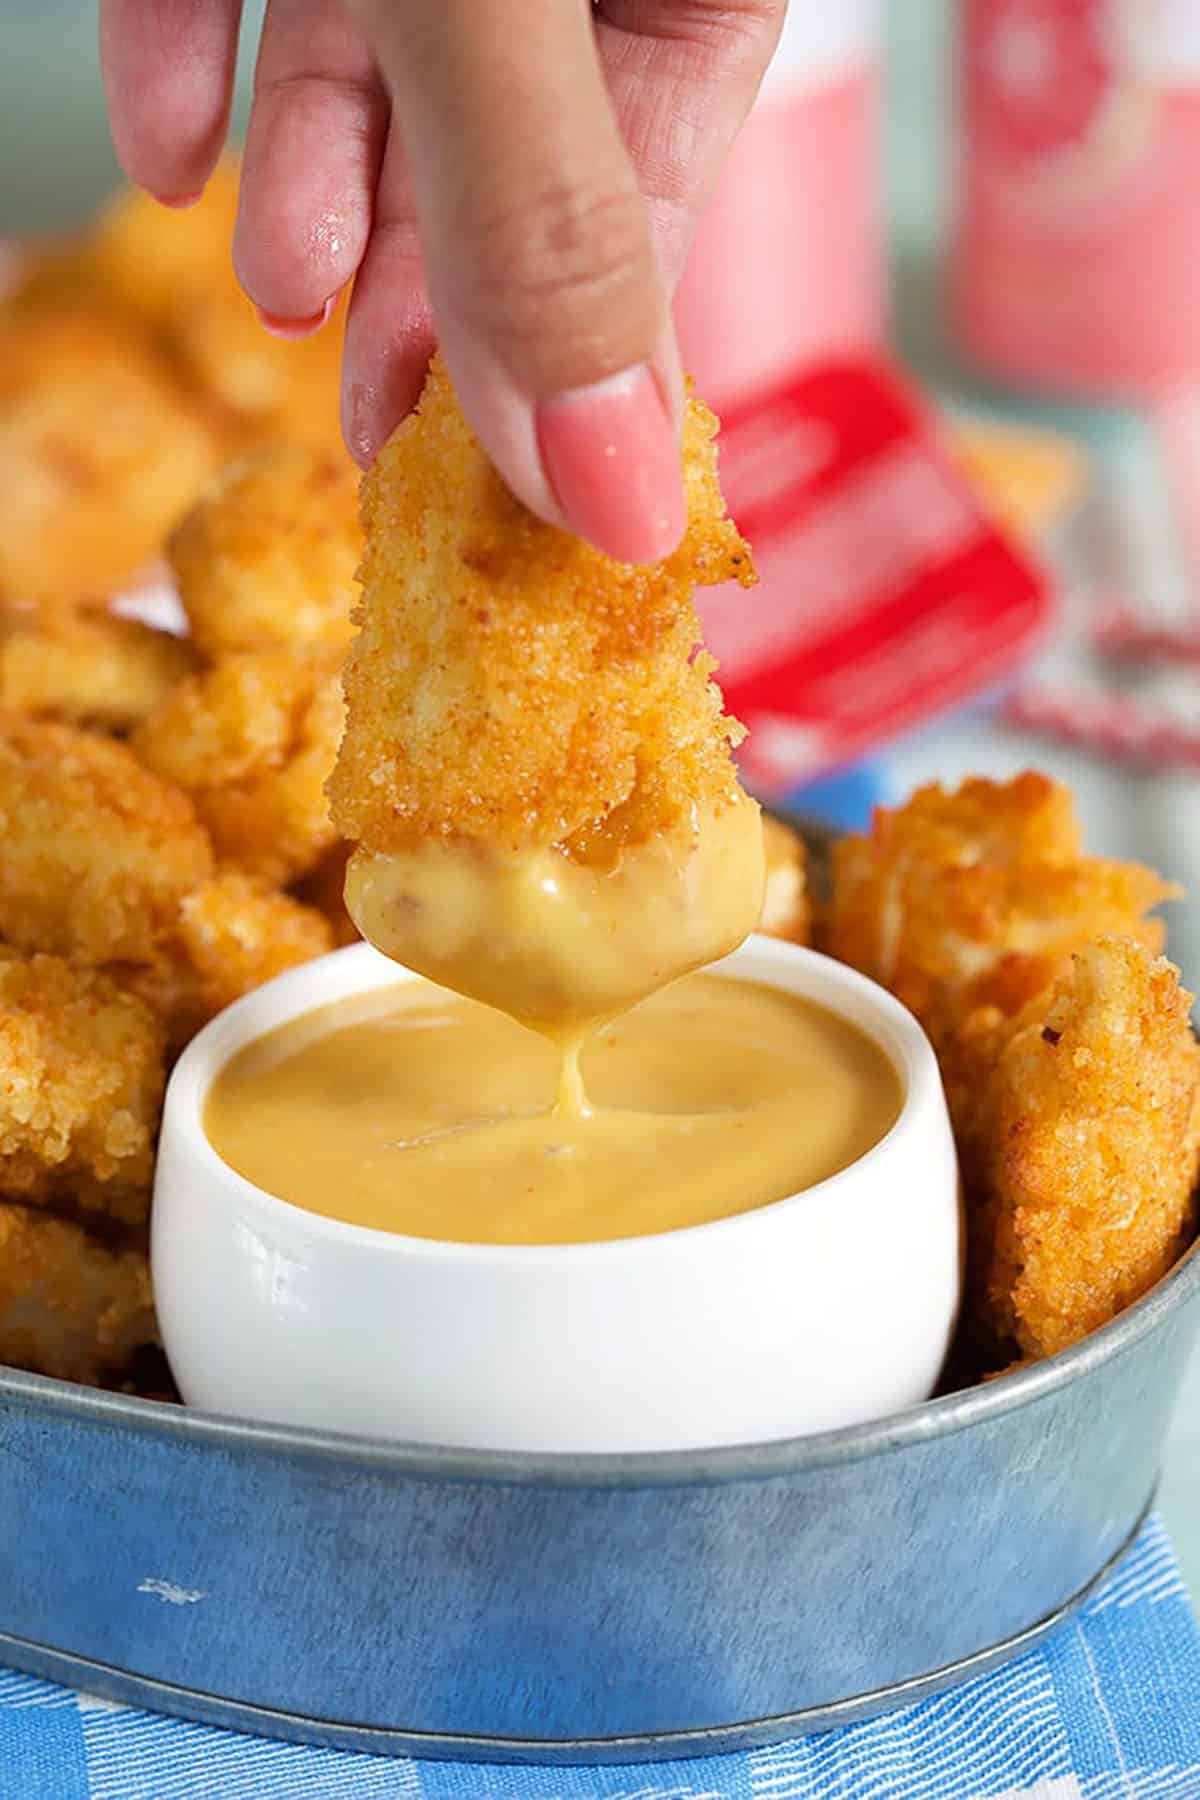 chicken nugget being dipped in sauce.